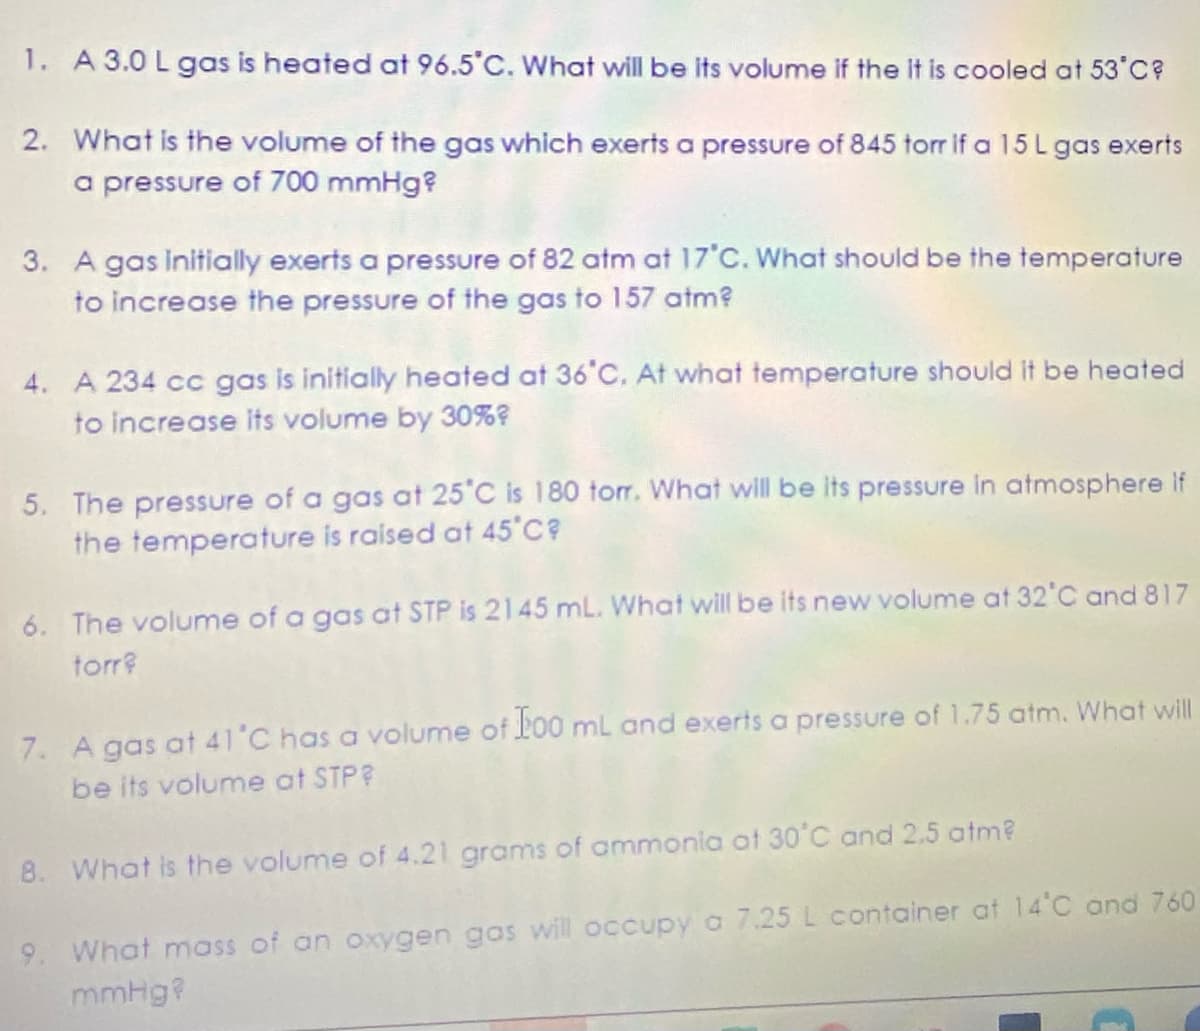 1. A 3.0 L gas is heated at 96.5°C. What will be its volume if the it is cooled at 53'C?
2. What is the volume of the gas which exerts a pressure of 845 torr if a 15L gas exerts
a pressure of 700 mmHg?
3. A gas initially exerts a pressure of 82 atm at 17'C. What should be the temperature
to increase the pressure of the gas to 157 atm?
4. A 234 cc gas is initially heated at 36°C. At what temperature should it be heated
to increase its volume by 30%?
5. The pressure of a gas at 25'C is 180 torr. What will be its pressure in atmosphere if
the temperature is raised at 45 C?
6. The volume of a gas at STP is 2145 mL. What will be its new volume at 32°C and 817
torr?
7. A gas at 41'C has a volume of Lo0 mL and exerts a pressure of 1.75 atm. What will
be its volume at STP?
8. What is the volume of 4.21 grams of ammonia at 30°C and 2.5 atm?
9. What mass of an oxygen gos will occupy a 7.25 L container at 14 C and 760
mmHg?
